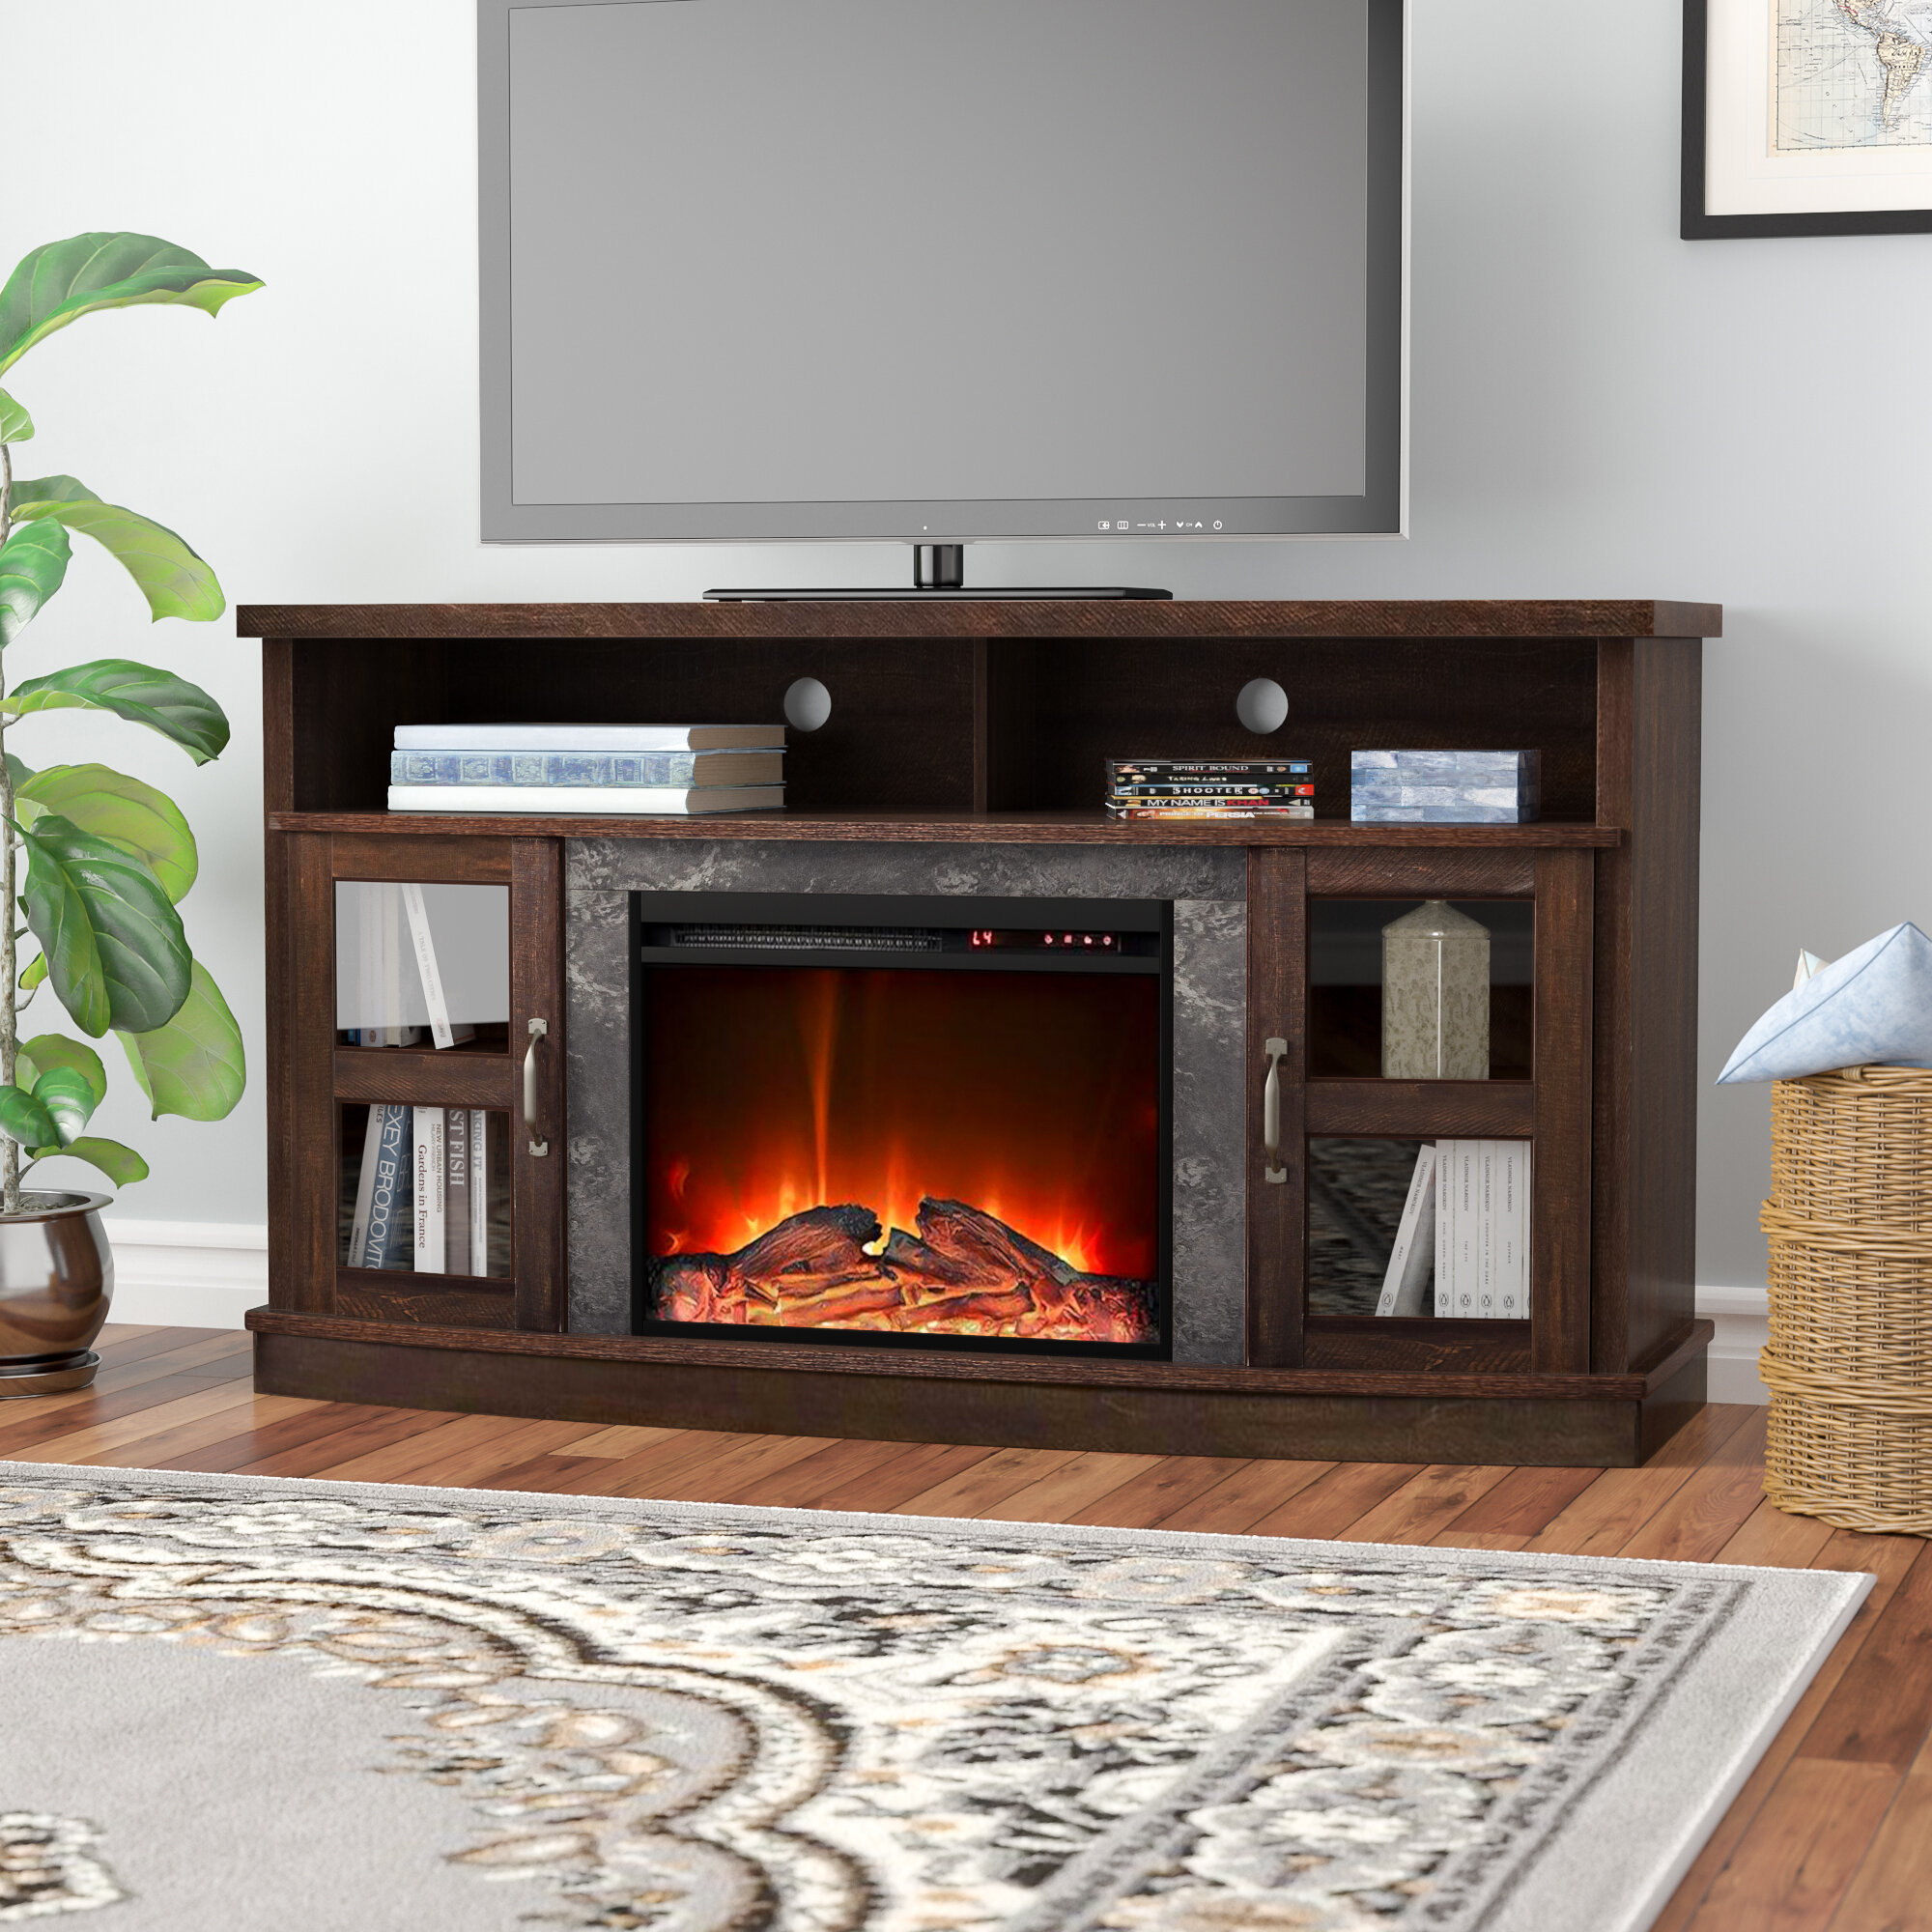 Darby Home Co Schuyler Tv Stand For Tvs Up To 60 With Fireplace